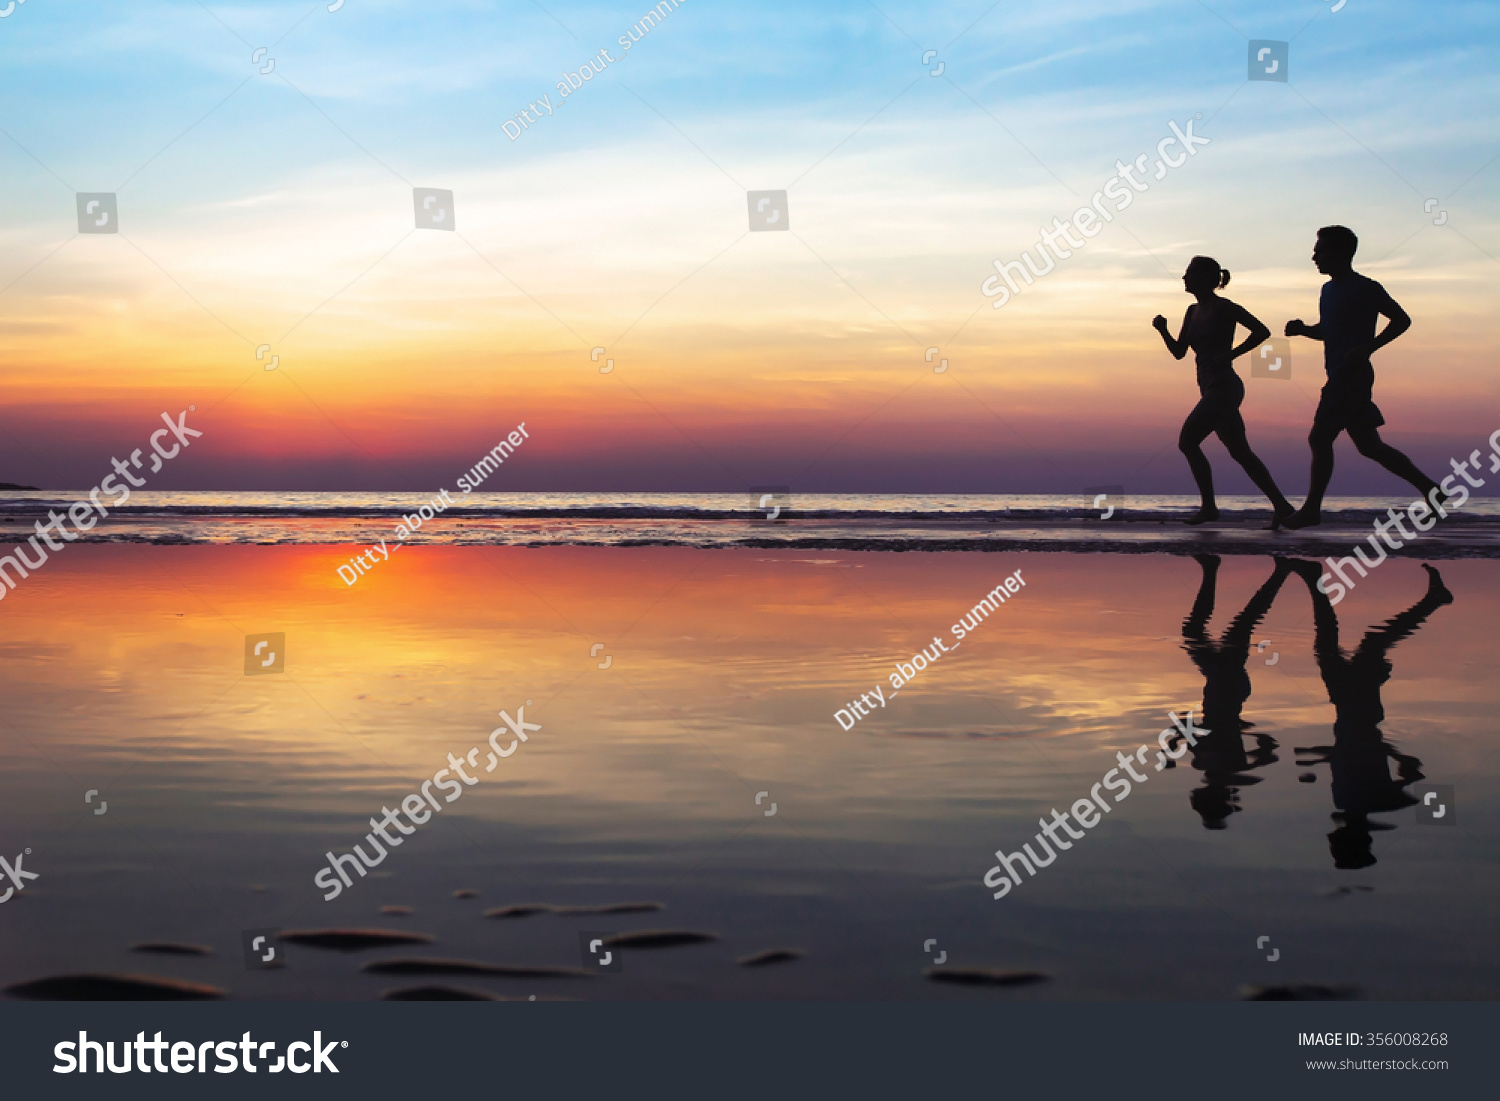 two runners on the beach, silhouette of people jogging at sunset, healthy lifestyle background with copyspace #356008268